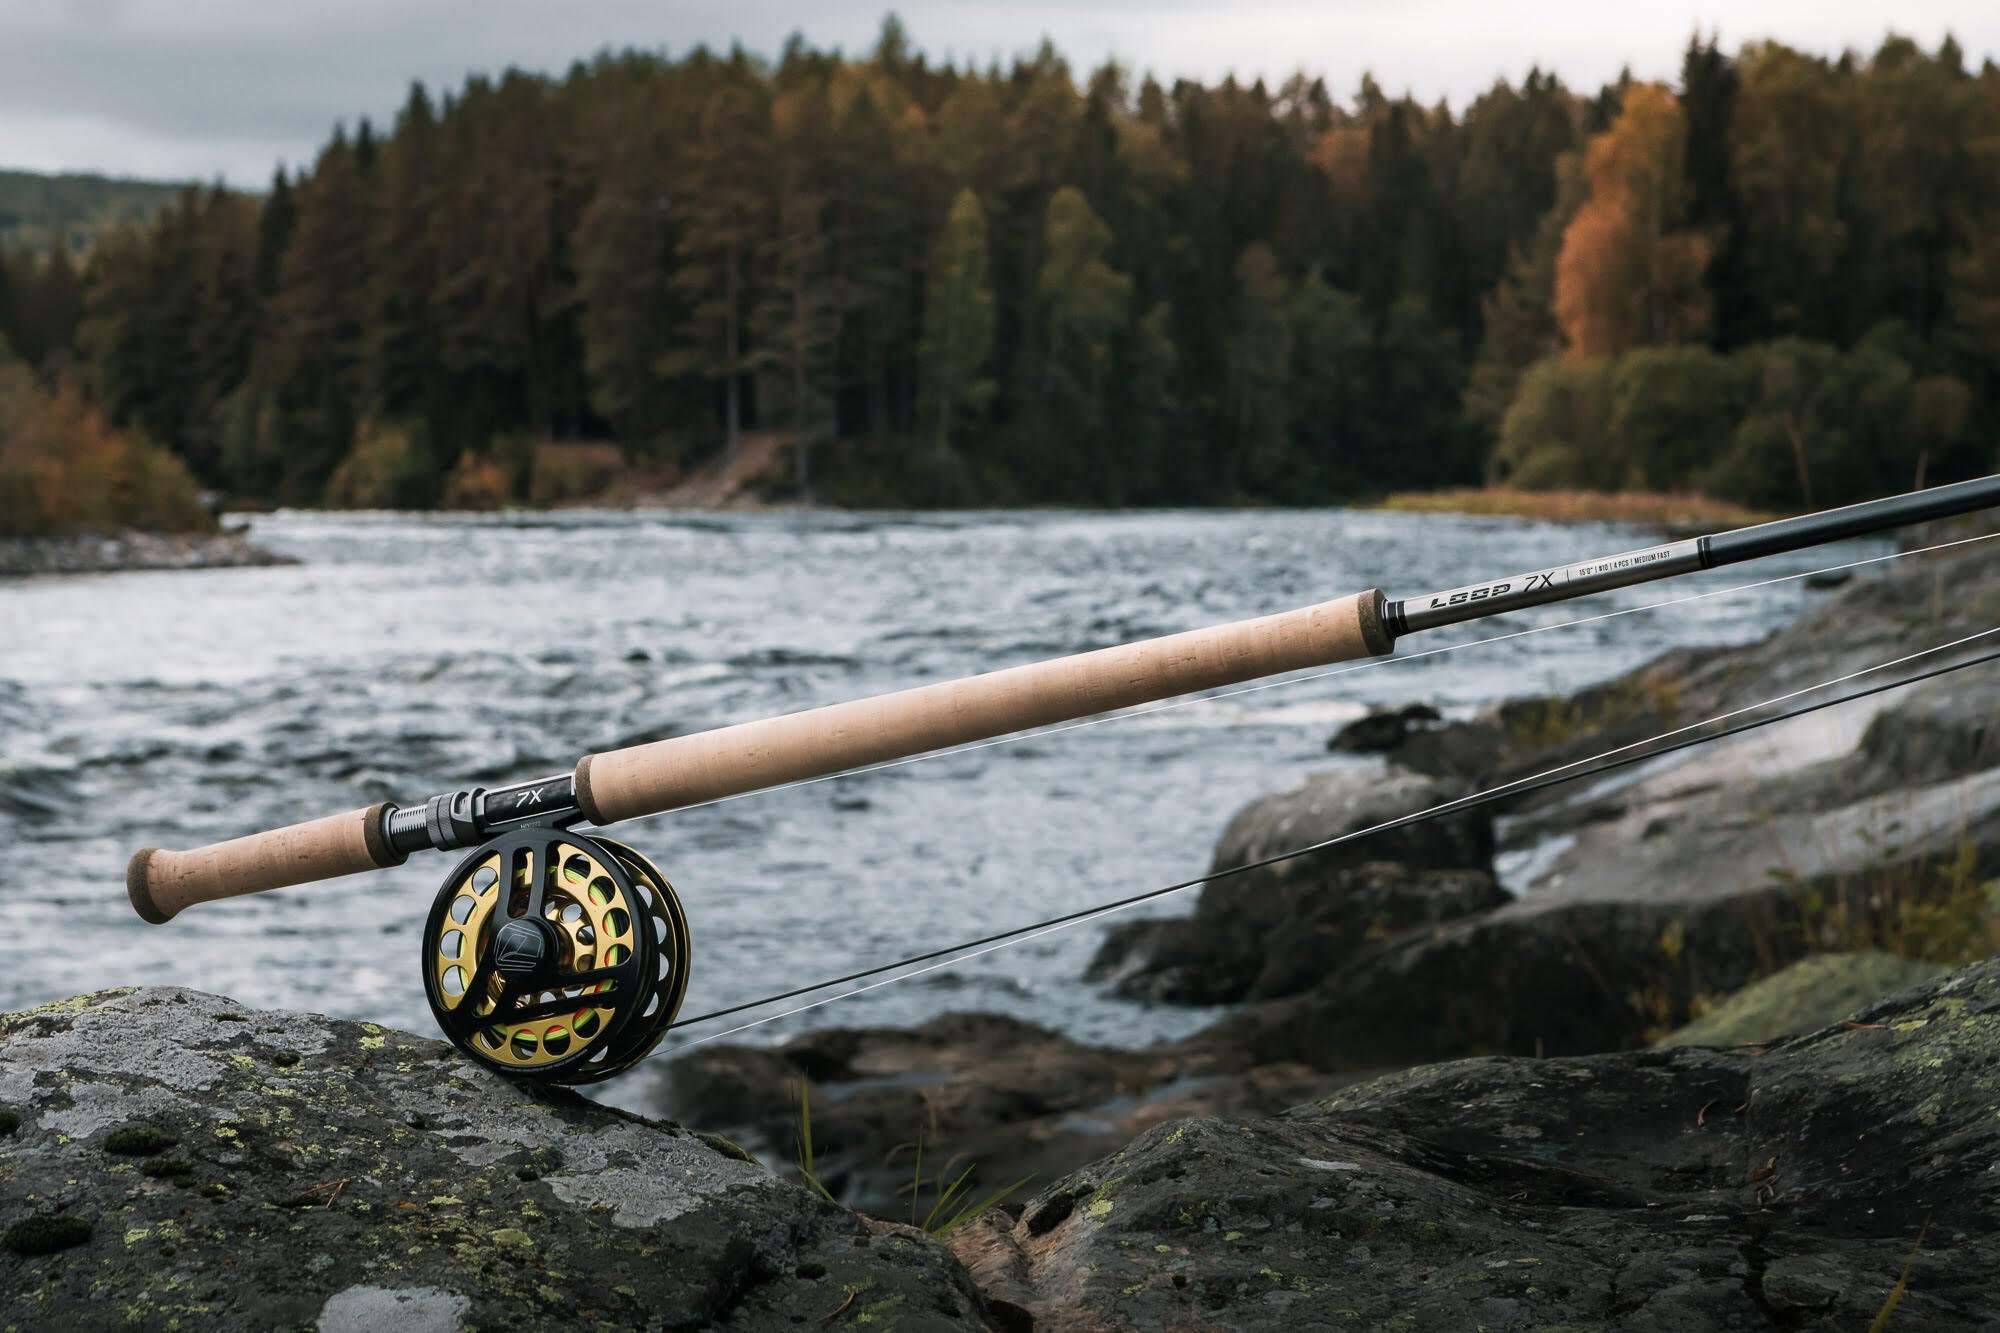 Buy Wakeman Fly Fishing Rod and Reel Combo Starter Kit Online at